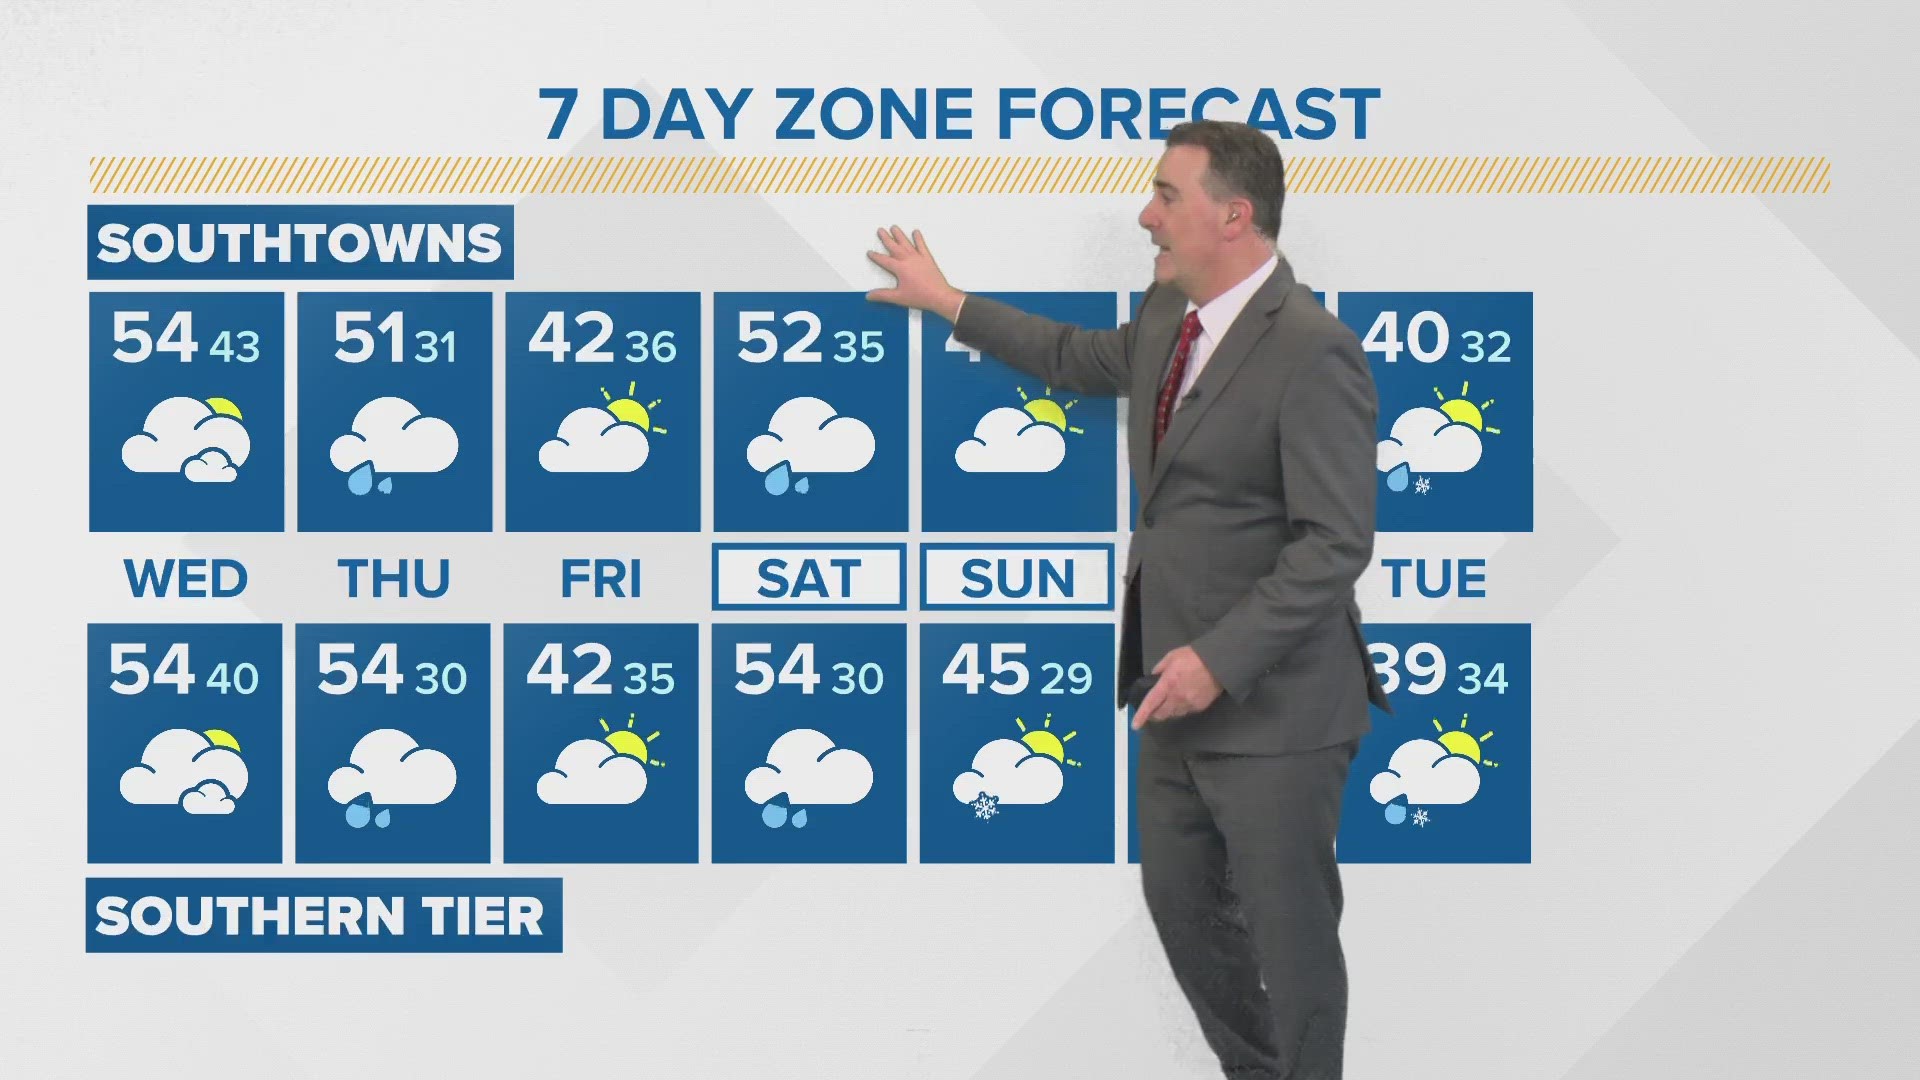 Kevin has a look at your seven-day zone forecast.